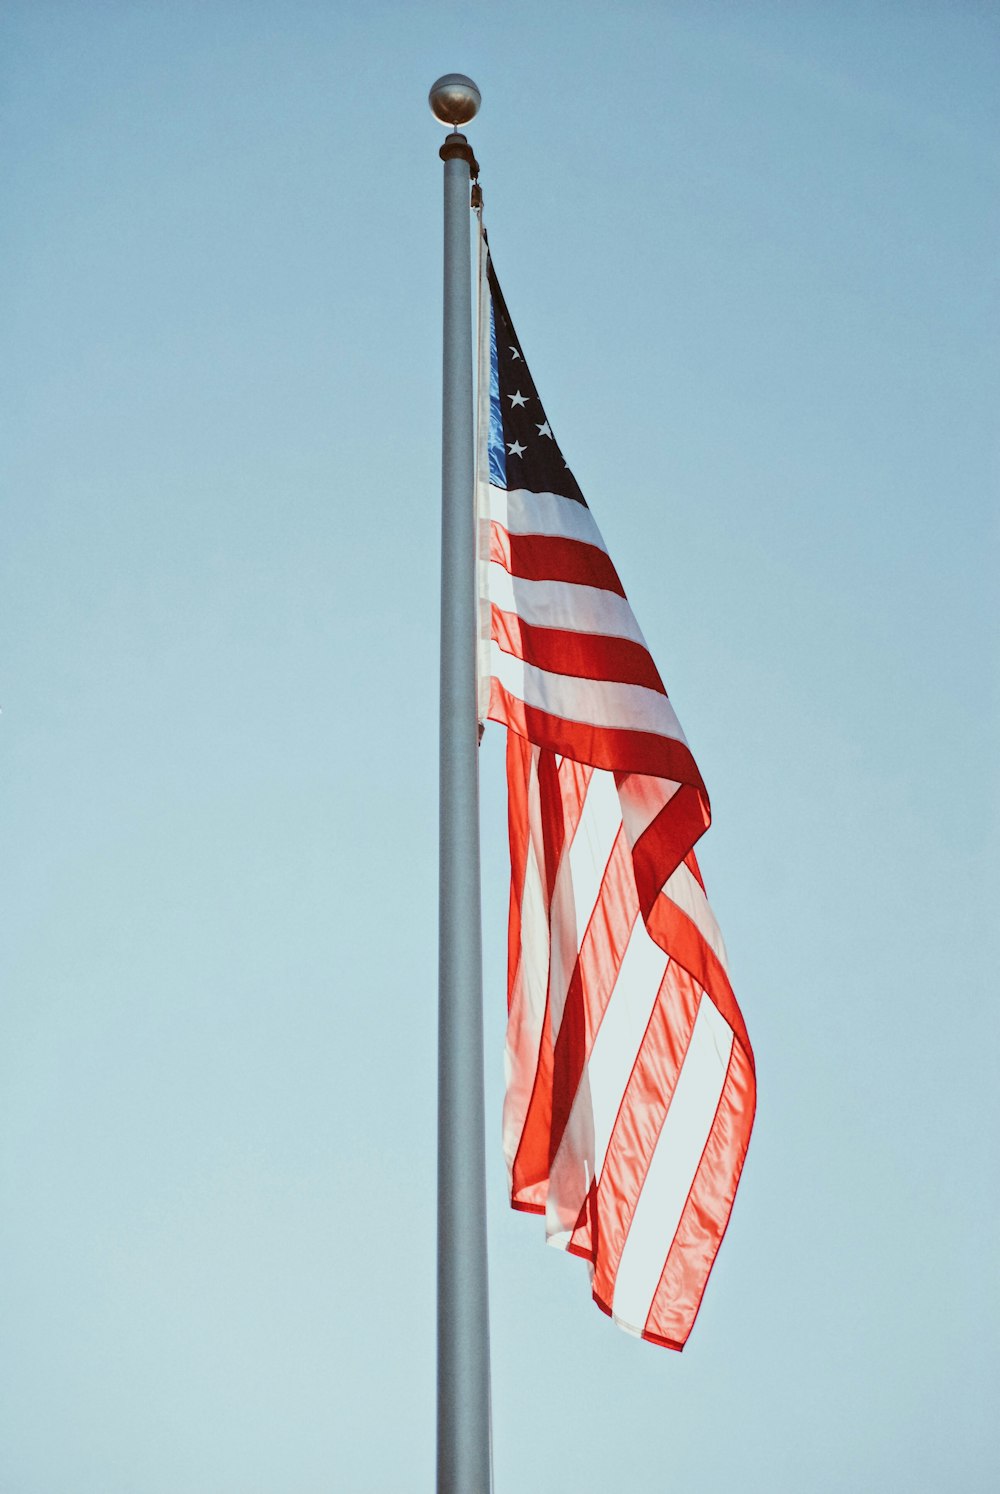 US flag under clear sky at daytime